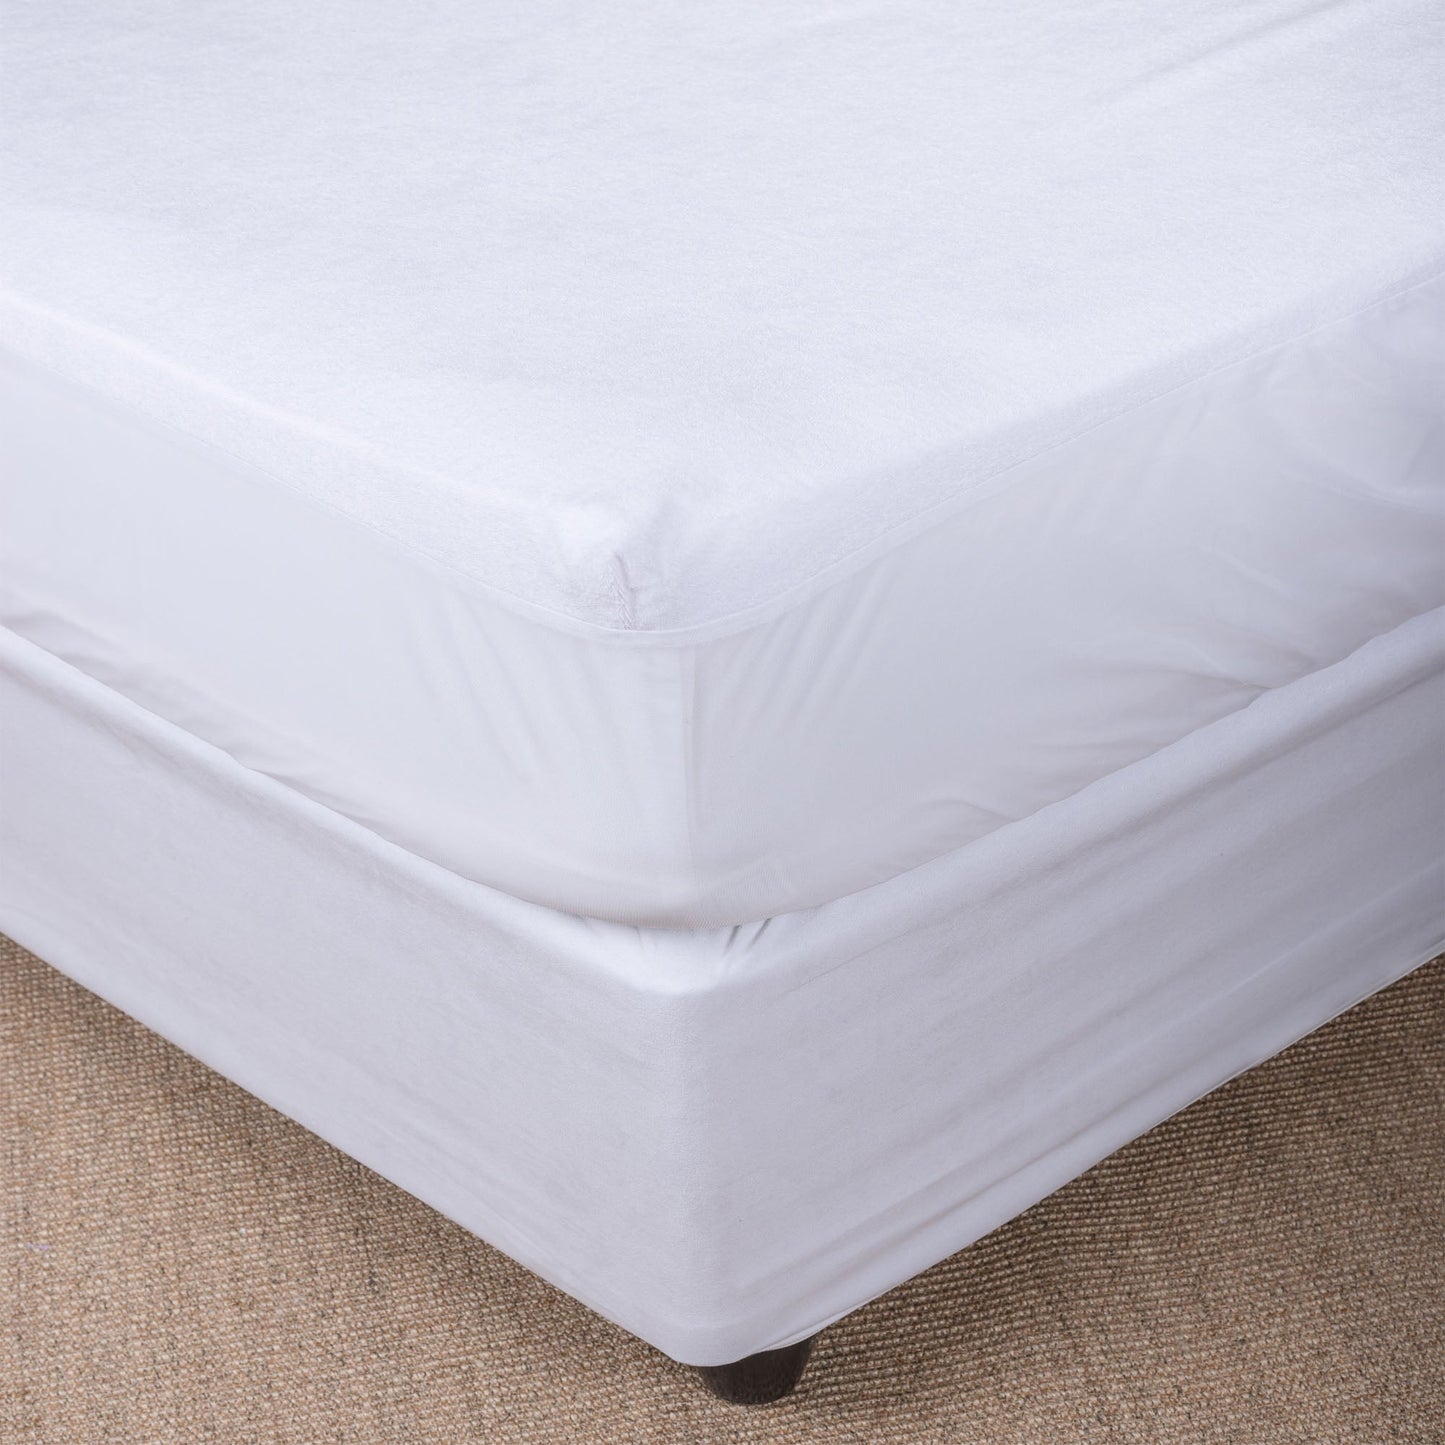 Fitted Mattress Protector, 69" x 80" x 8" w/4 angles